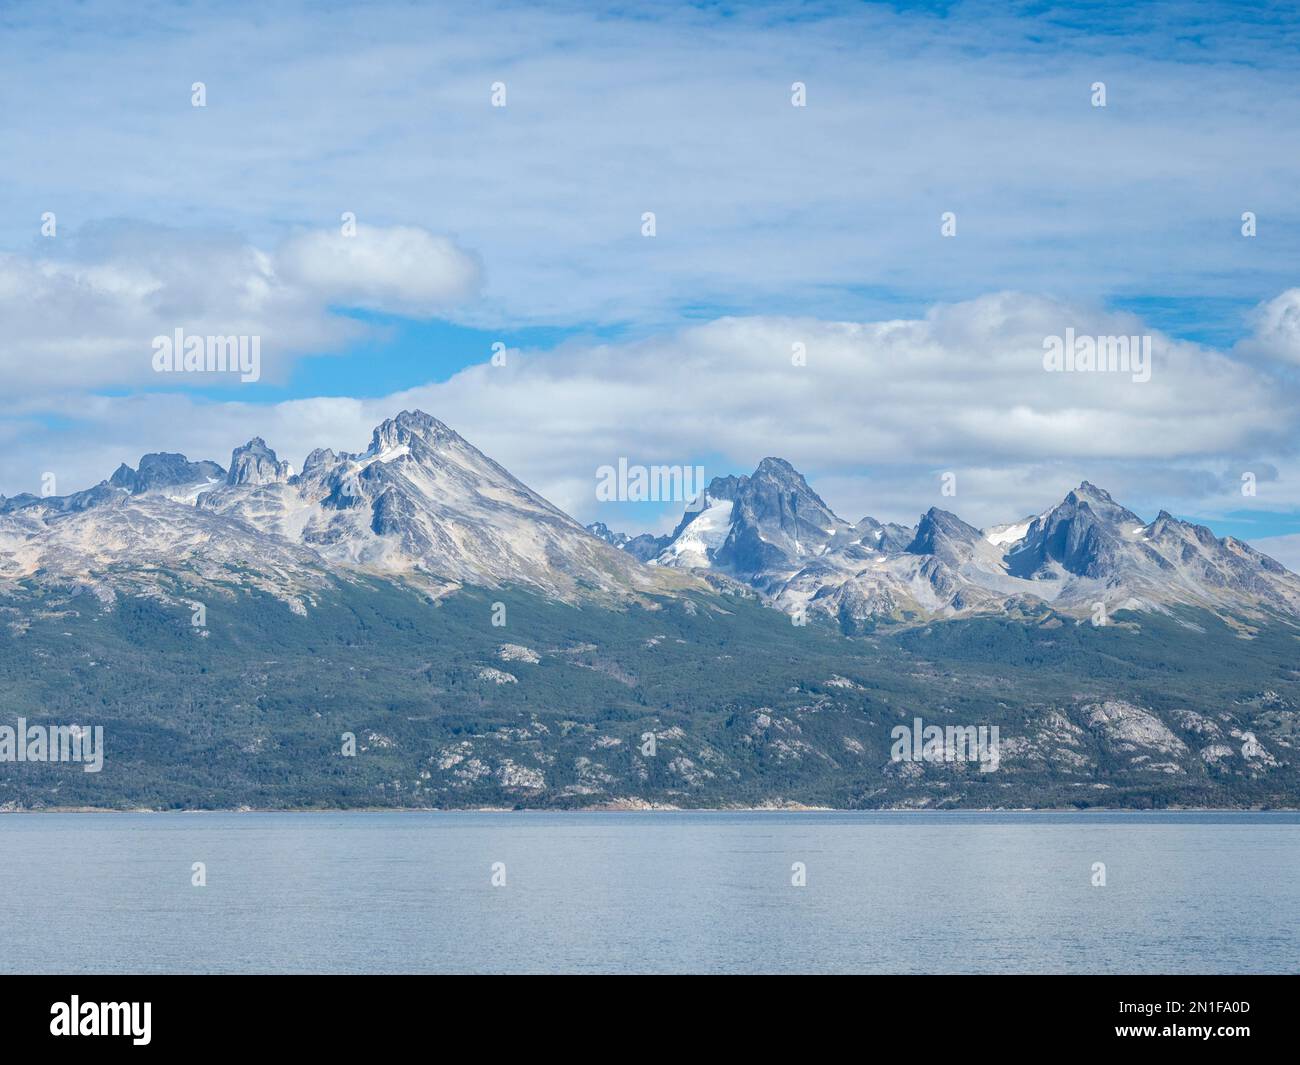 View of the Andes Mountains and Notofagus forest in Lago Acigami, Tierra del Fuego, Argentina, South America Stock Photo